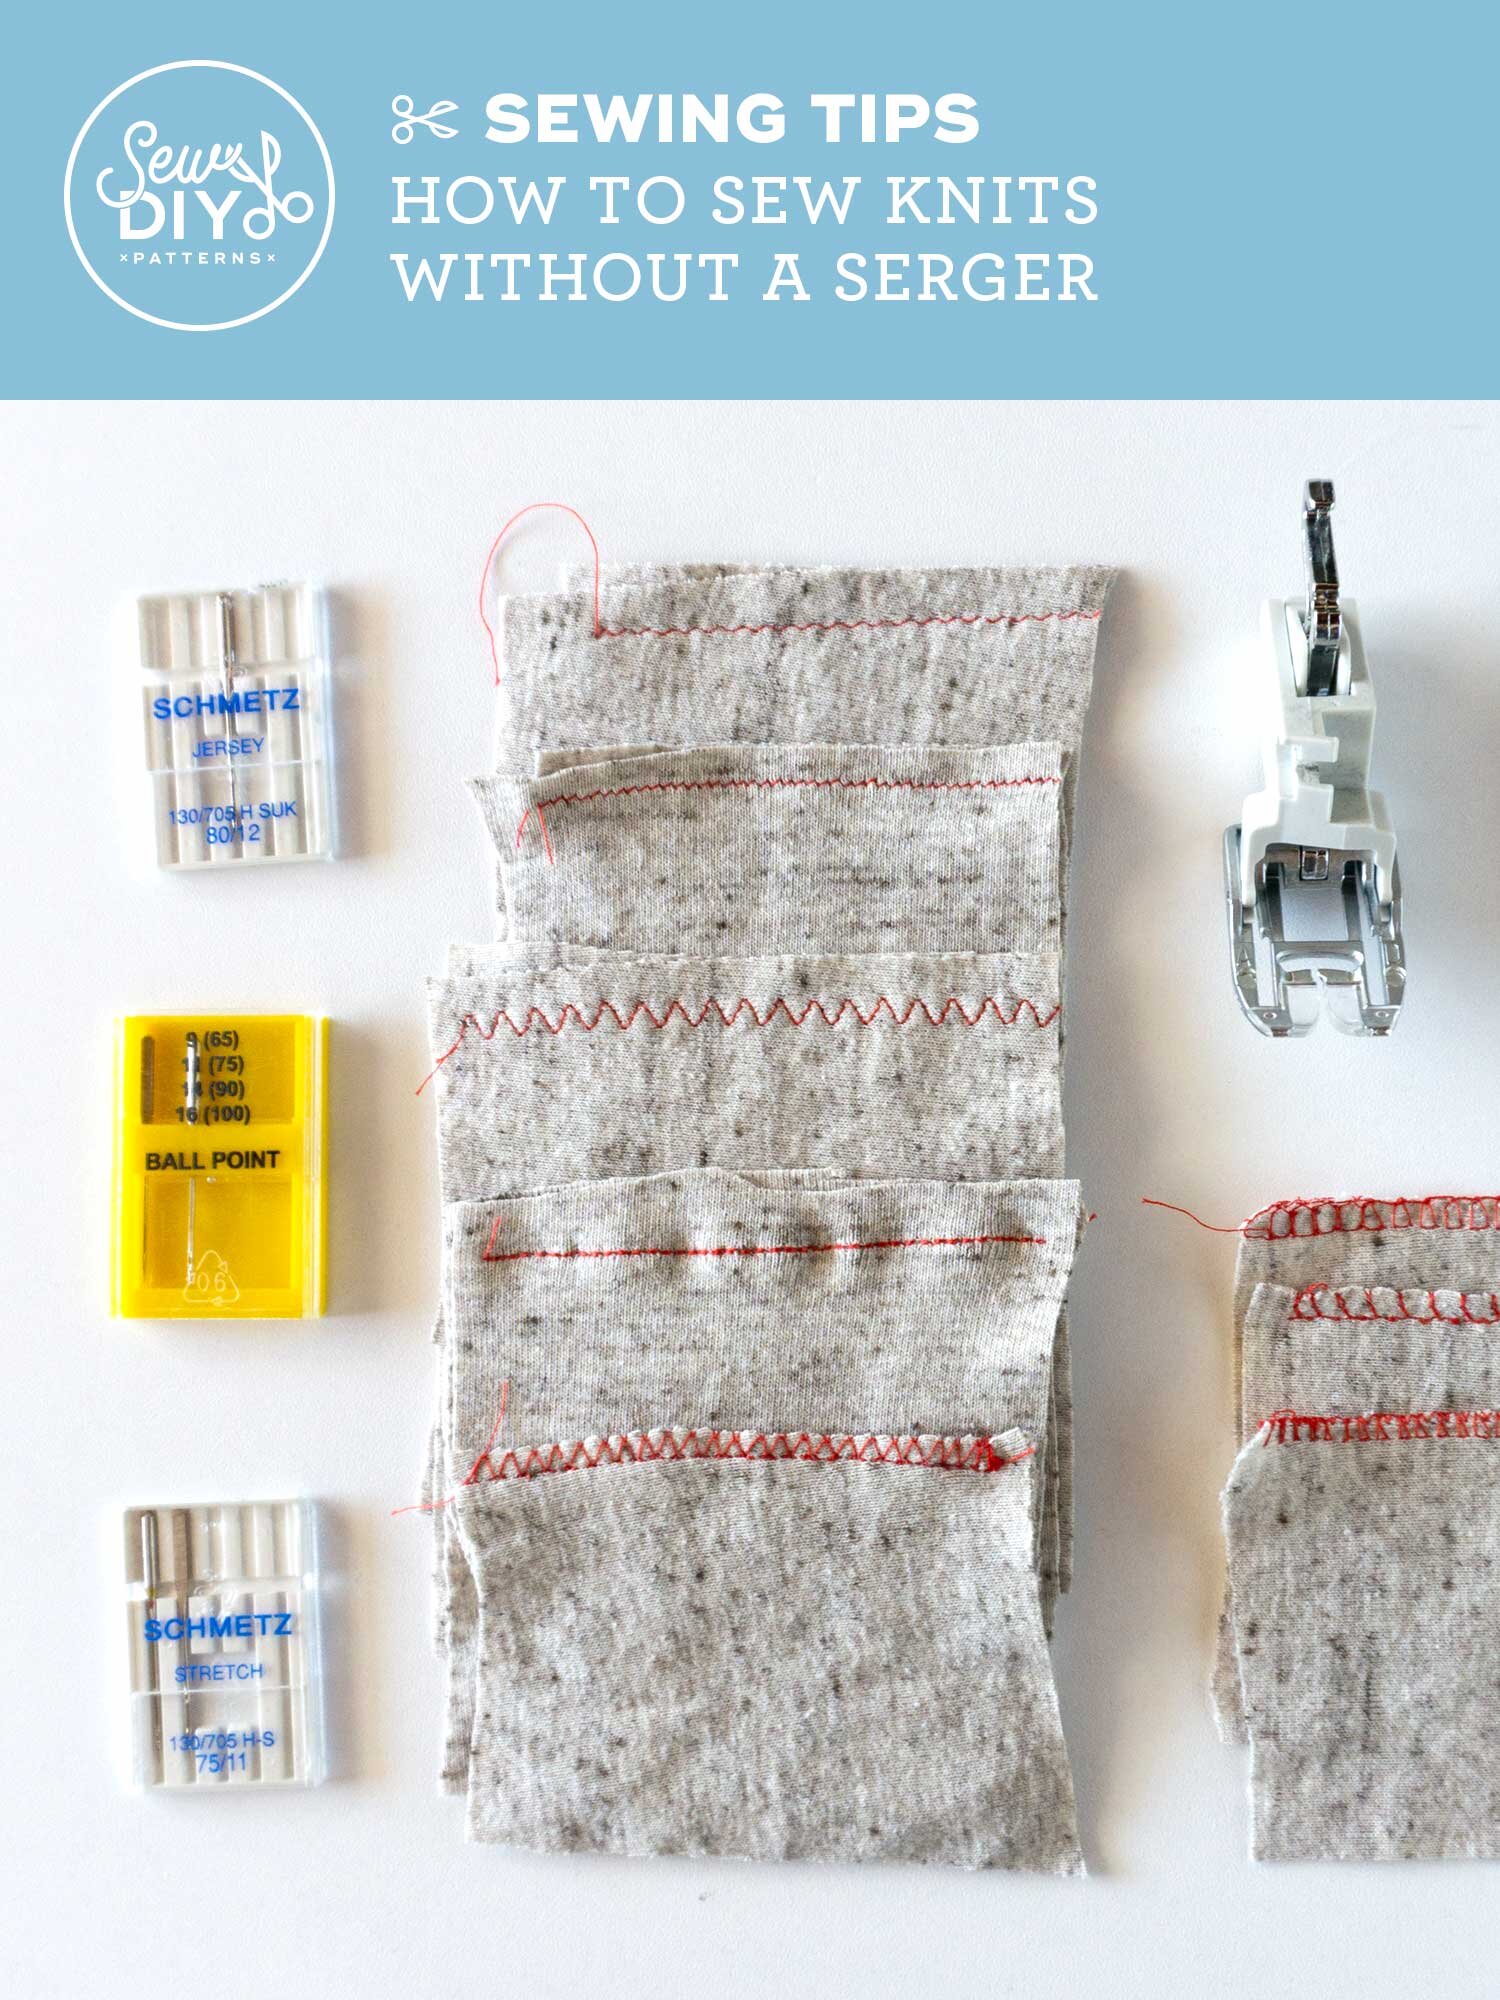 Sewing with stretch fabric - everything you need to know - I Can Sew This